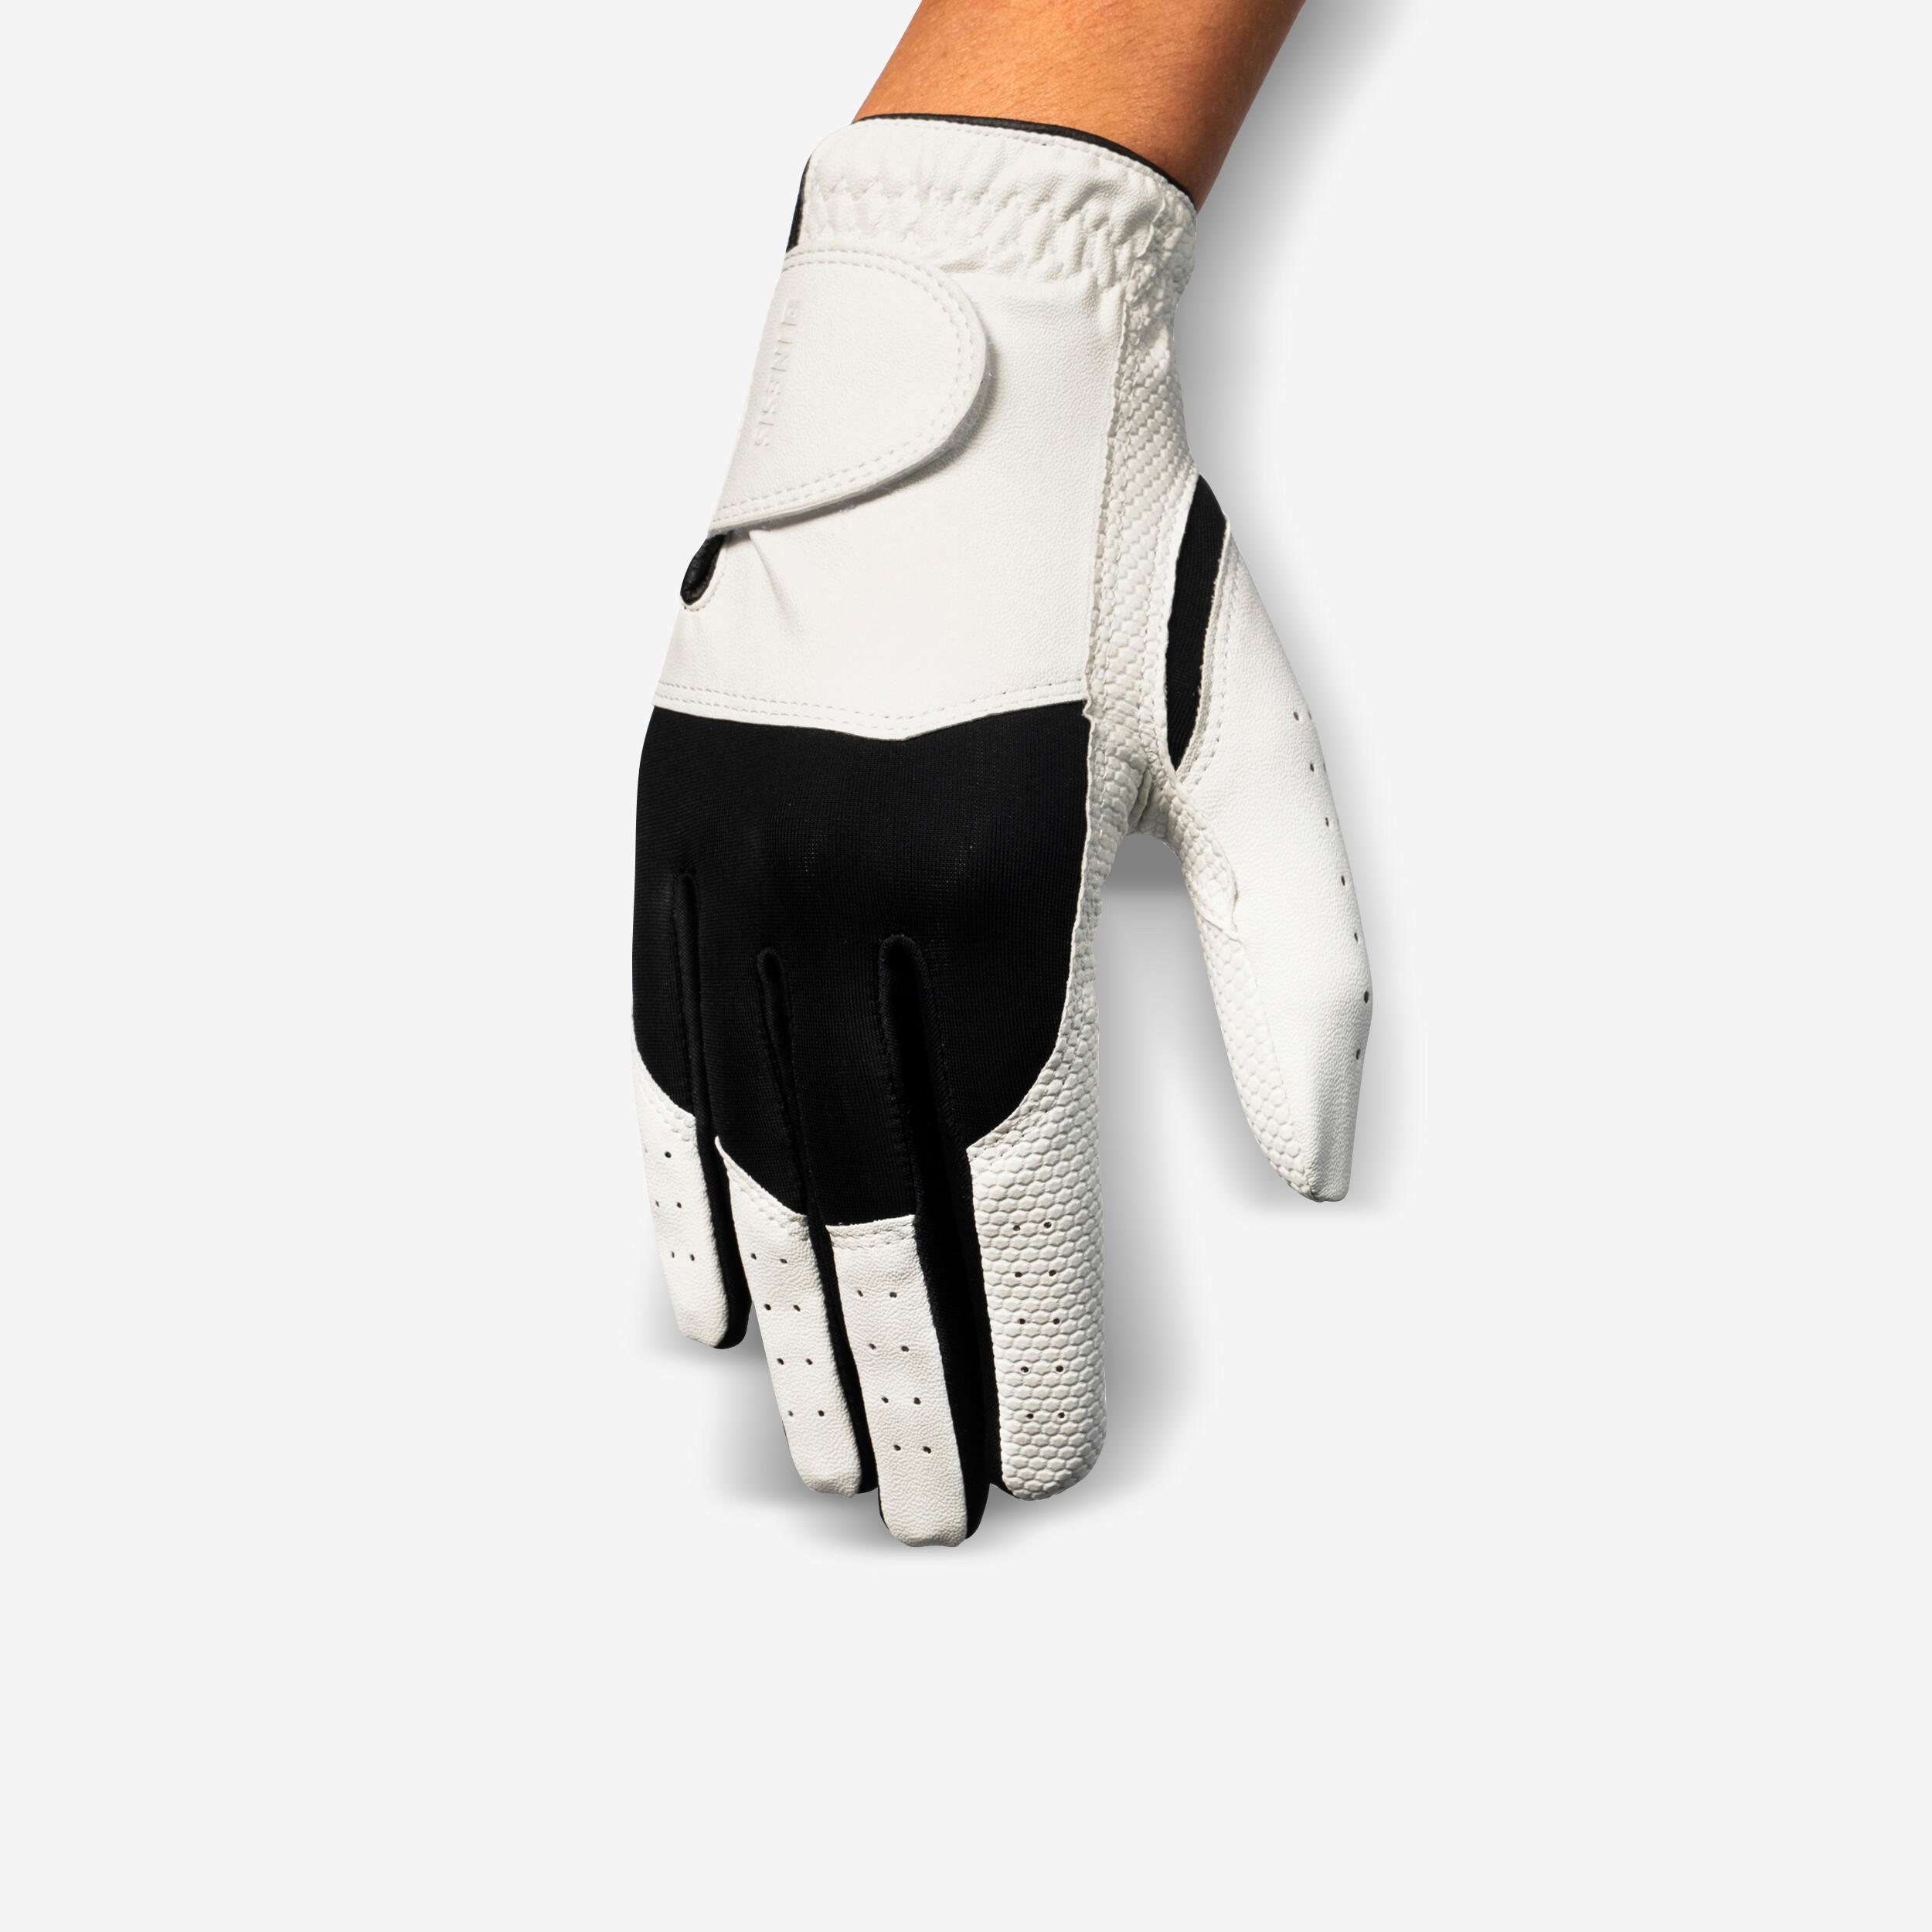 INESIS Women's golf resistance glove for Left-Handed players - white and black